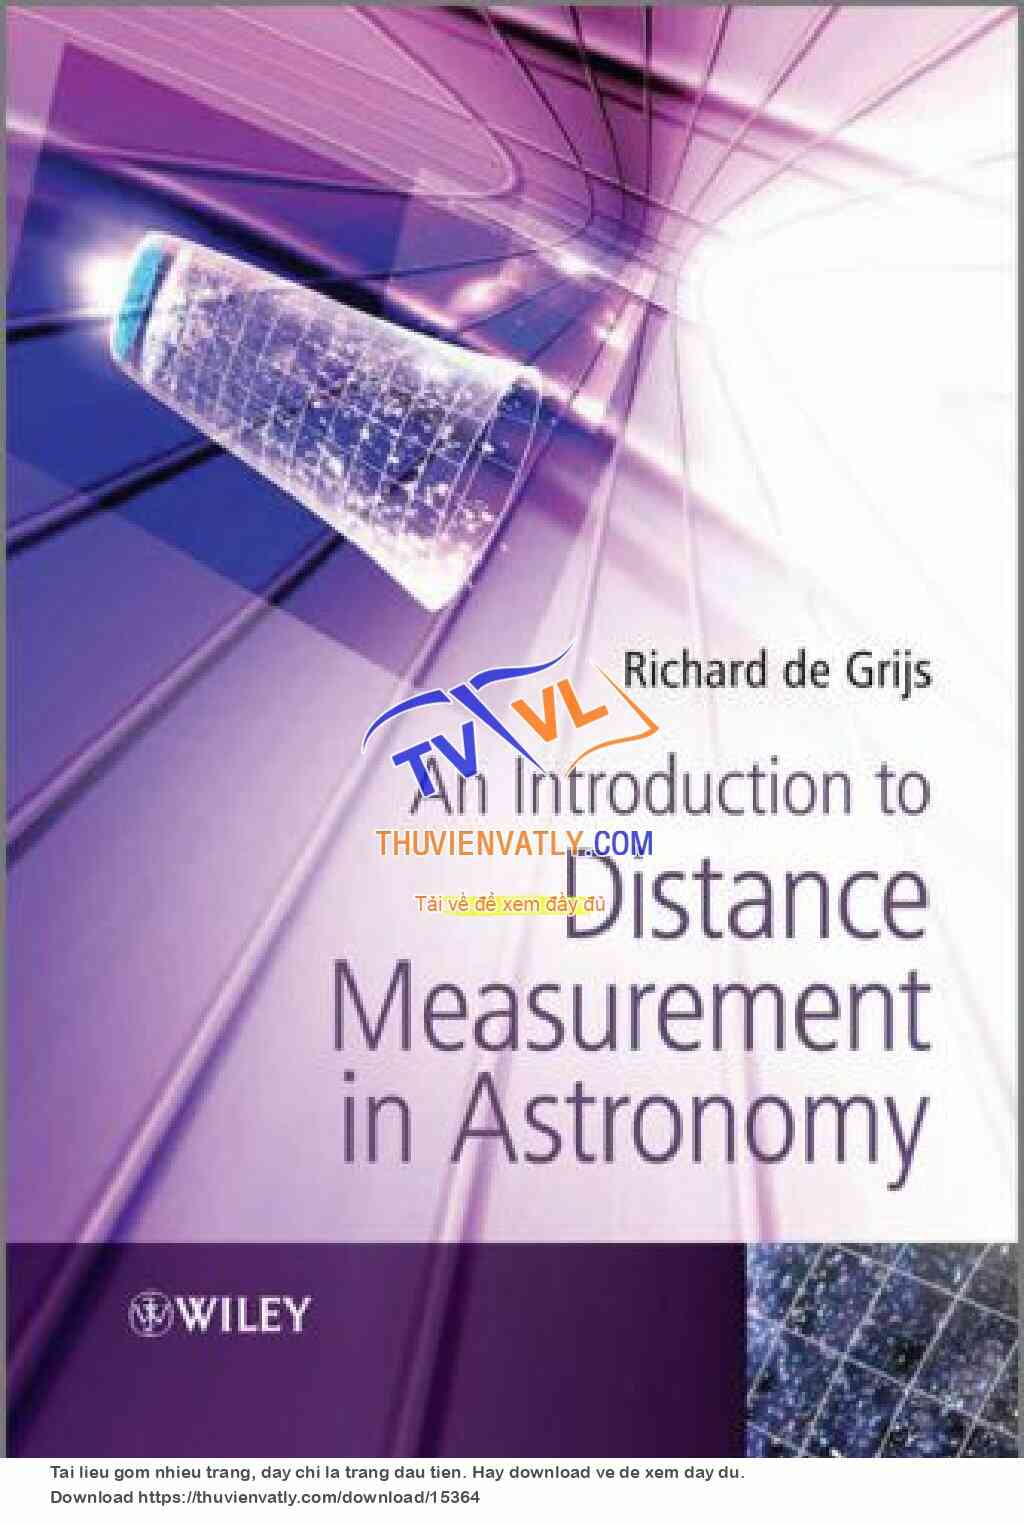 An Intro. to Distance Measurement in Astronomy - R. de Grijs (Wiley, 2011)